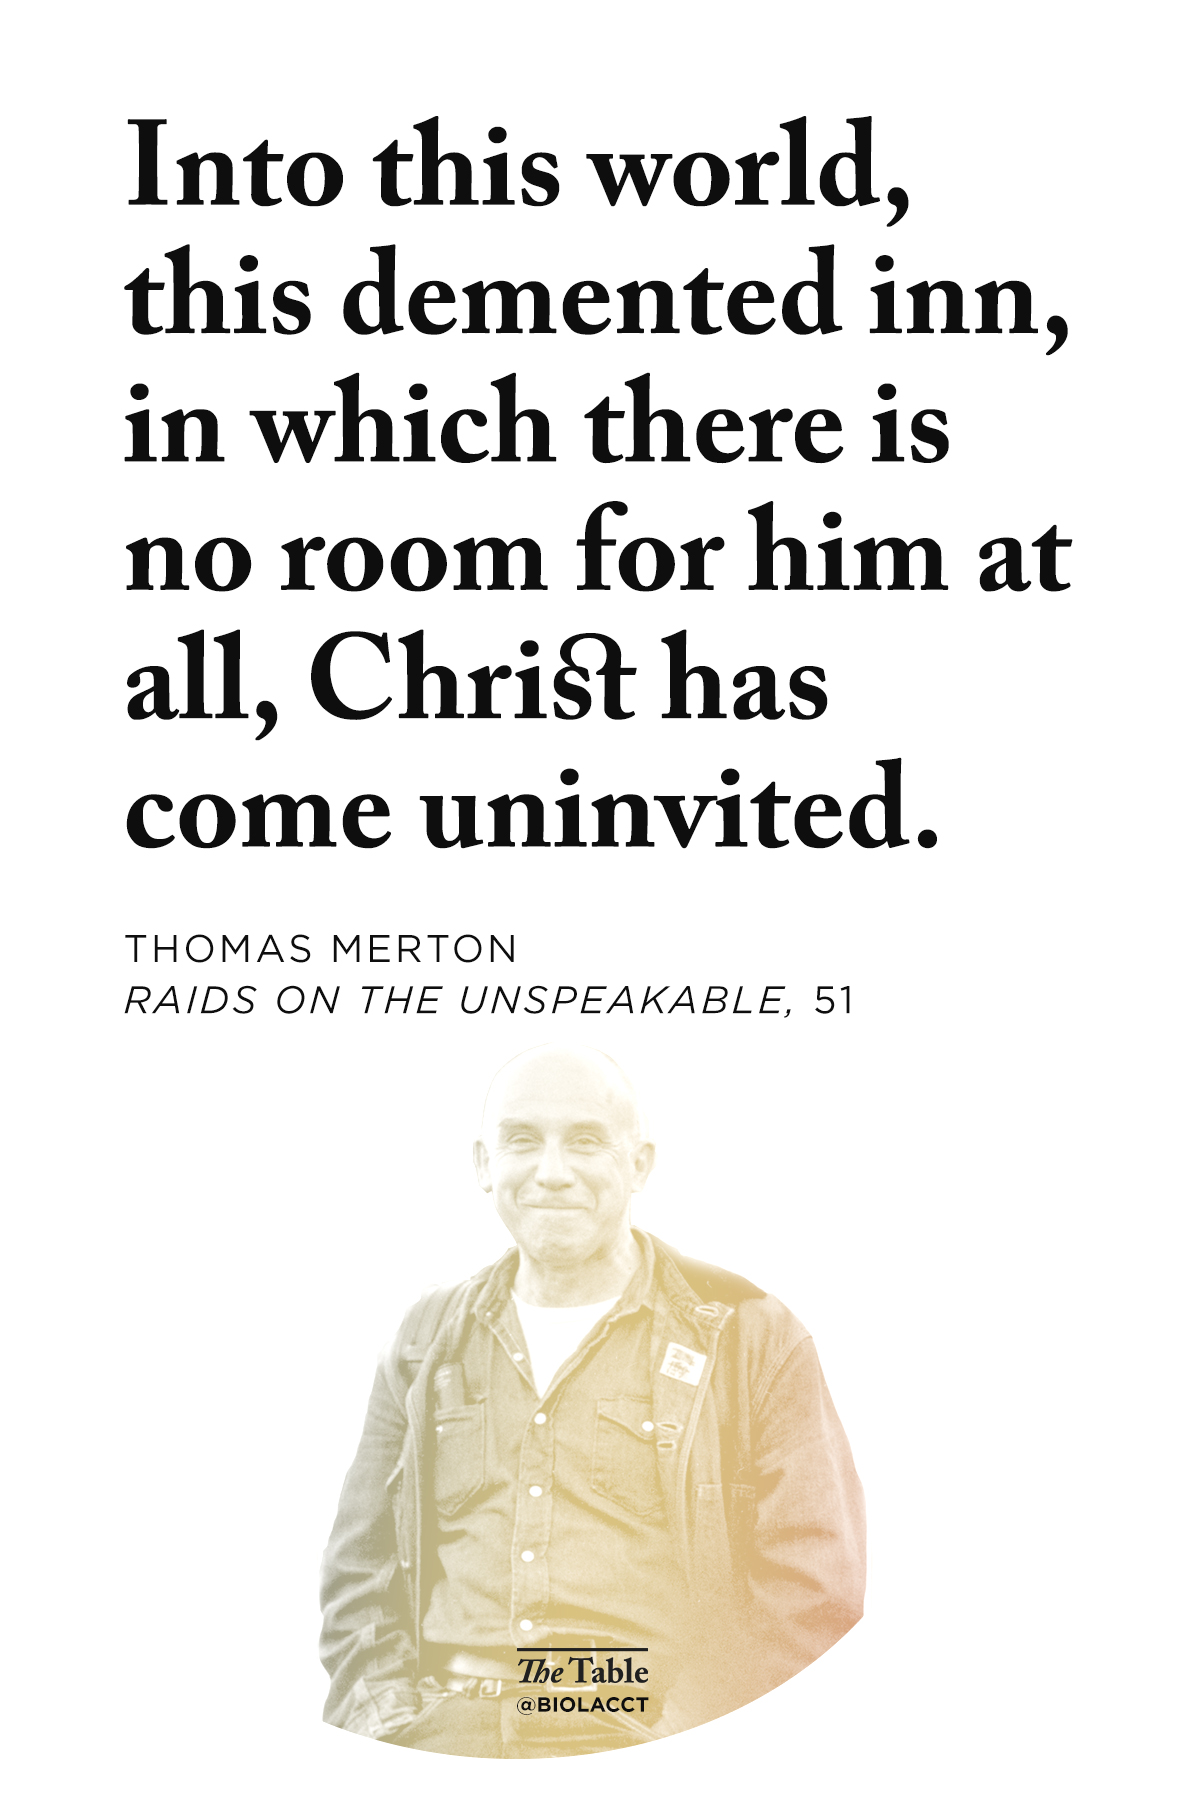 Quote: Into this world, this demented inn, in which there is absolutely no room for him at all, Christ comes uninvited.